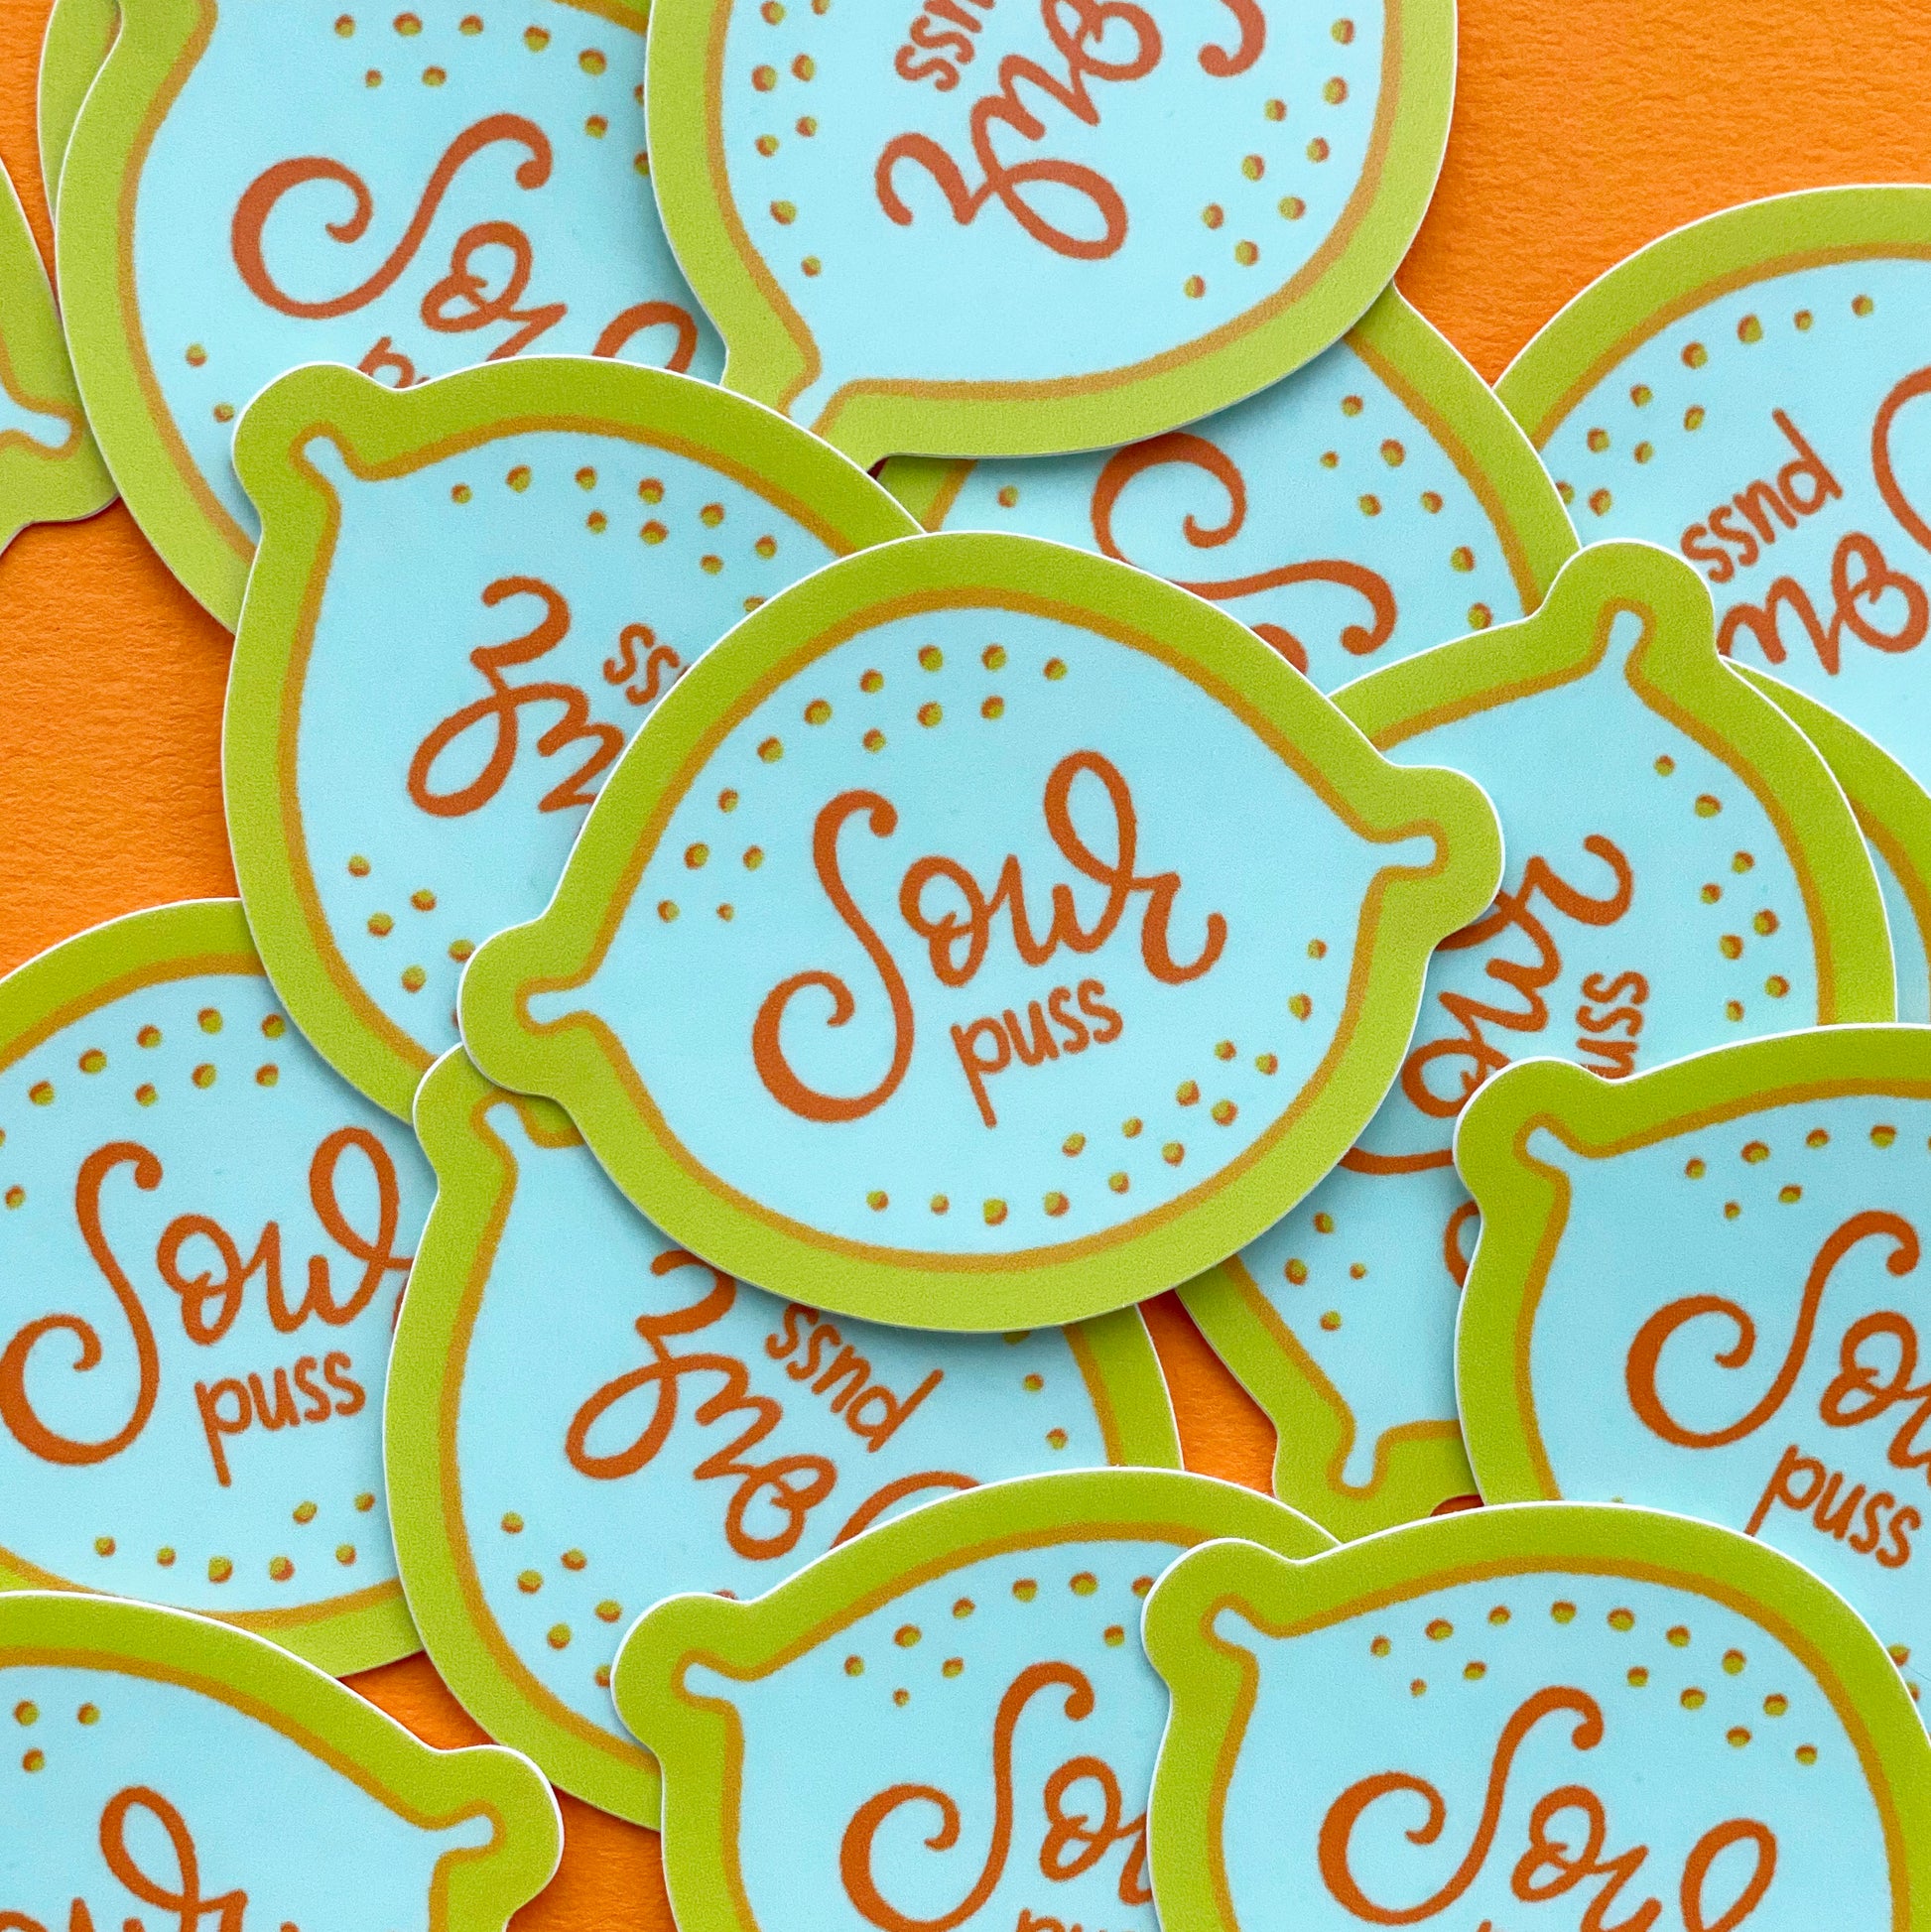 A pile of vinyl stickers that feather an illustration of a blue lemon and the words "Sour puss" written on it. They sit on a bright orange paper background.